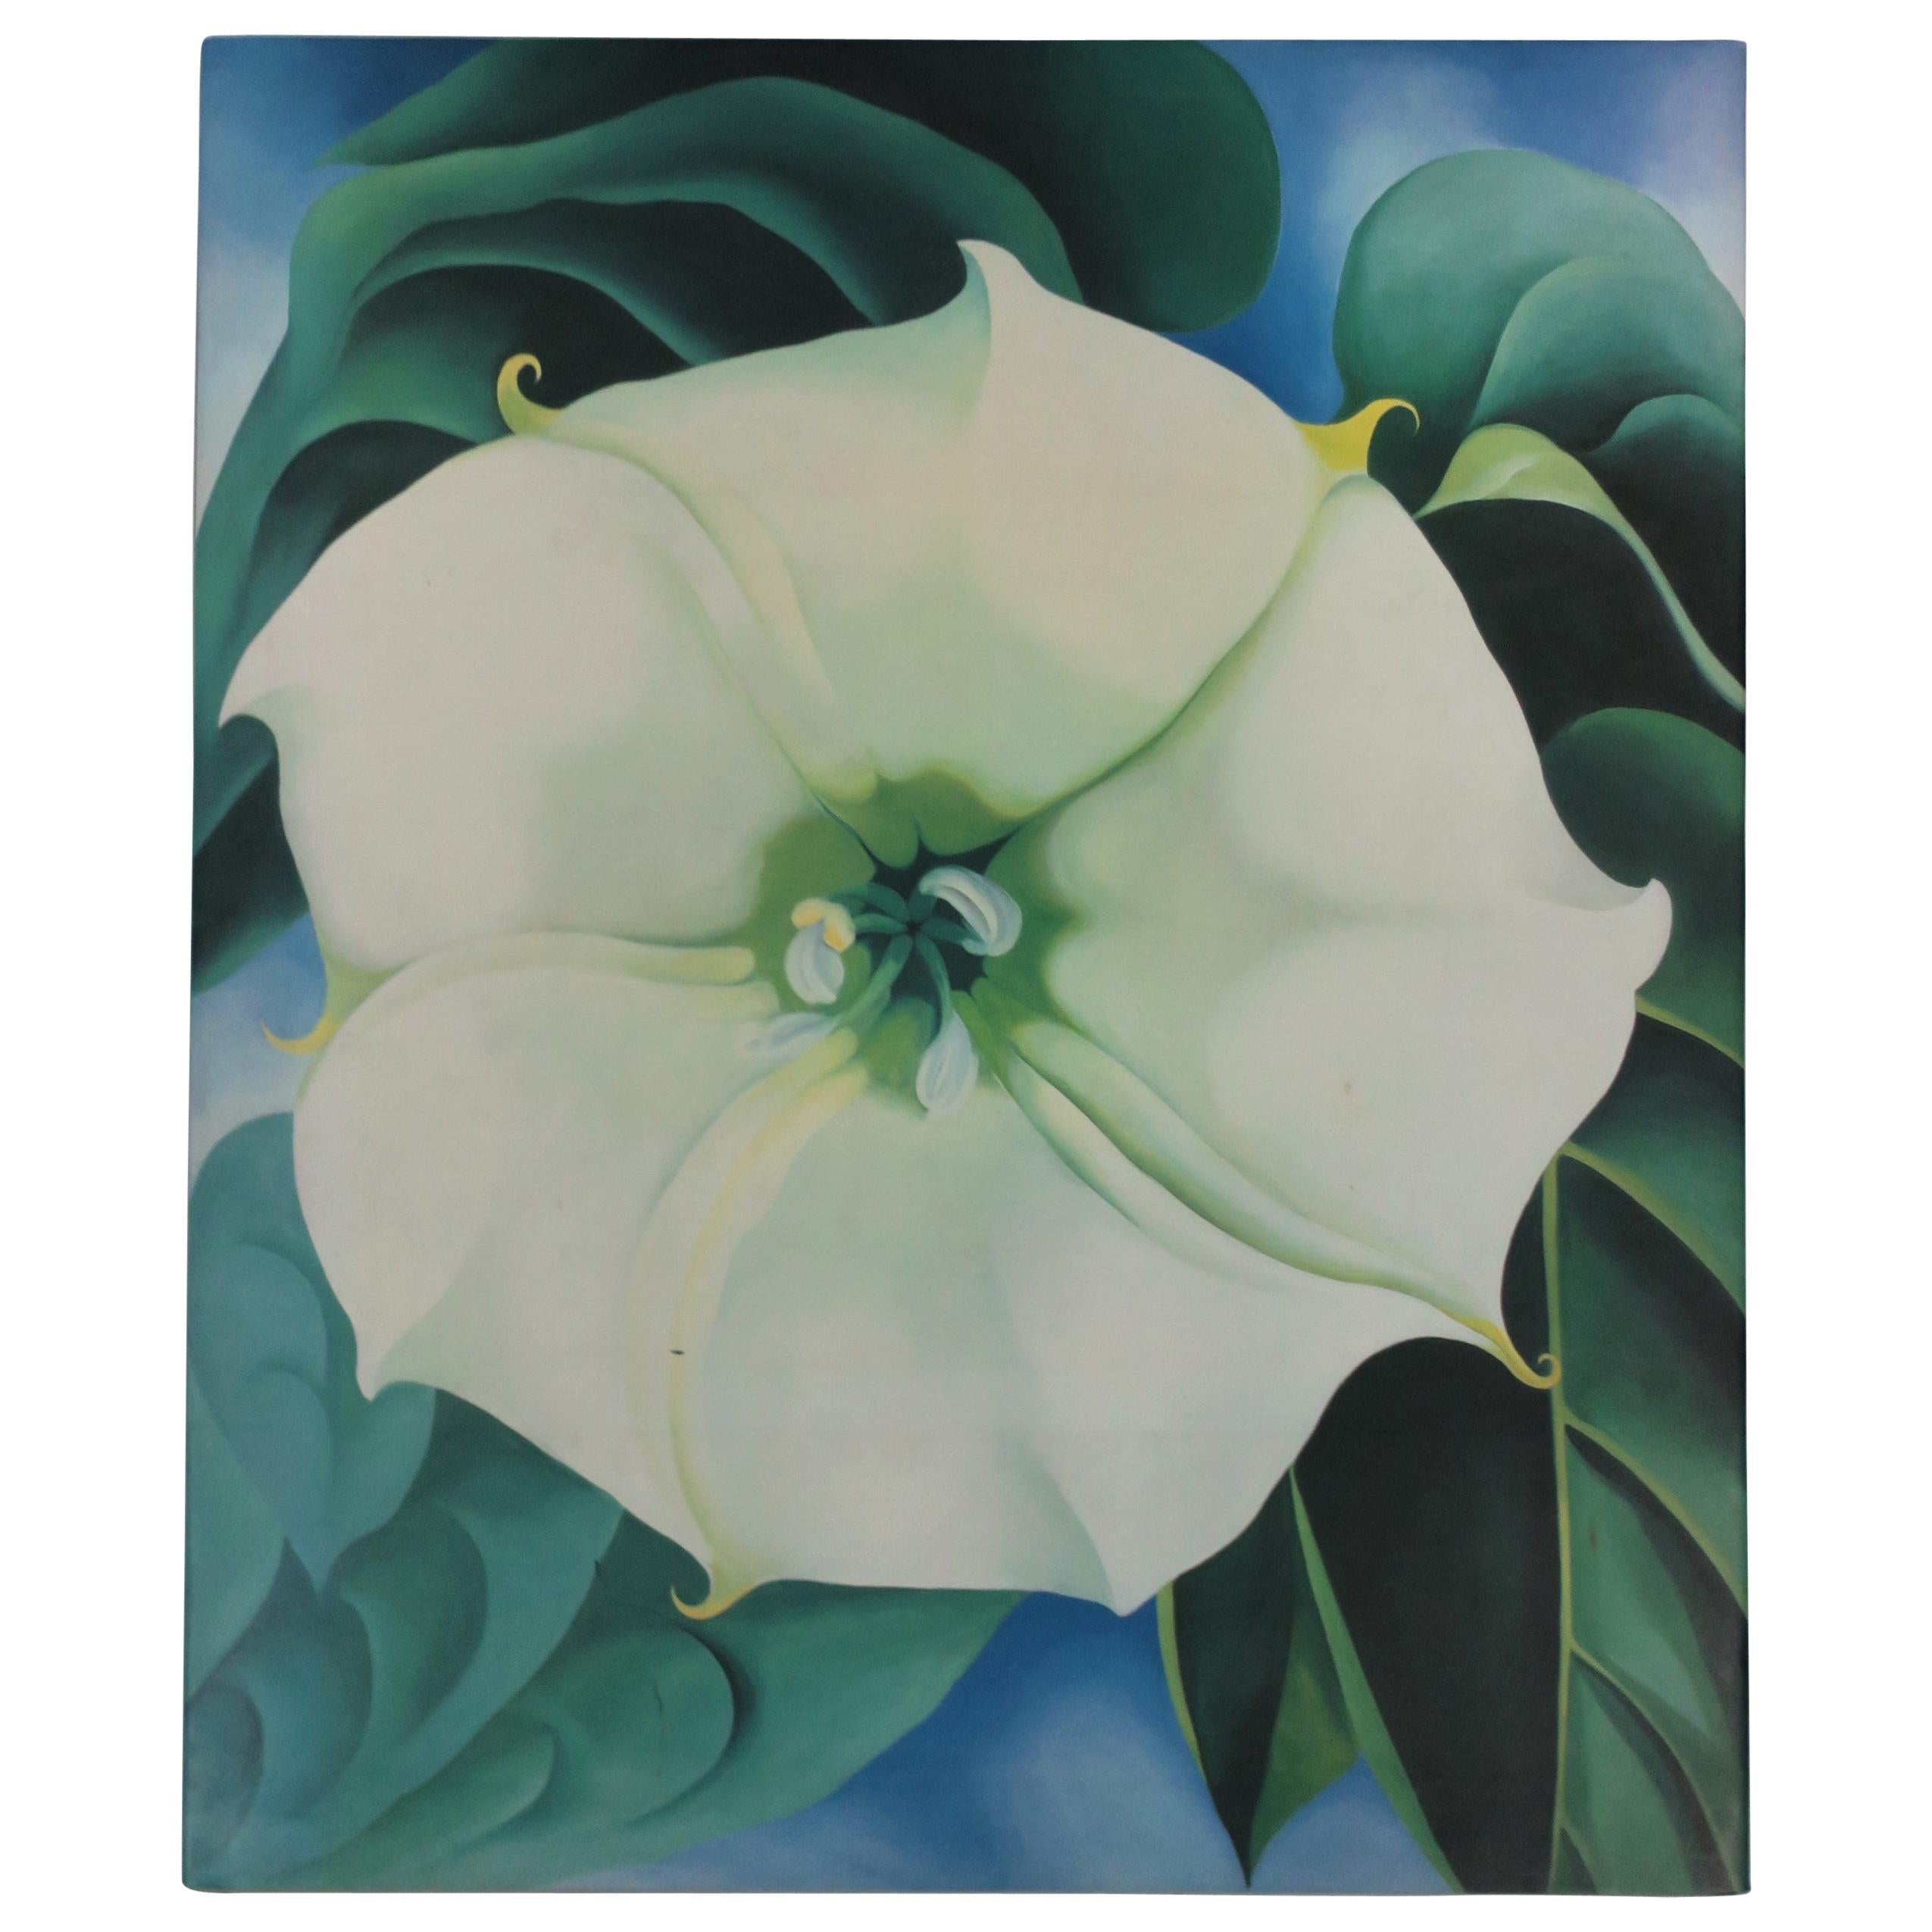 Georgia O'Keeffe, 'One Hundred Flowers', Coffee Table or Library Book ca. 1980s